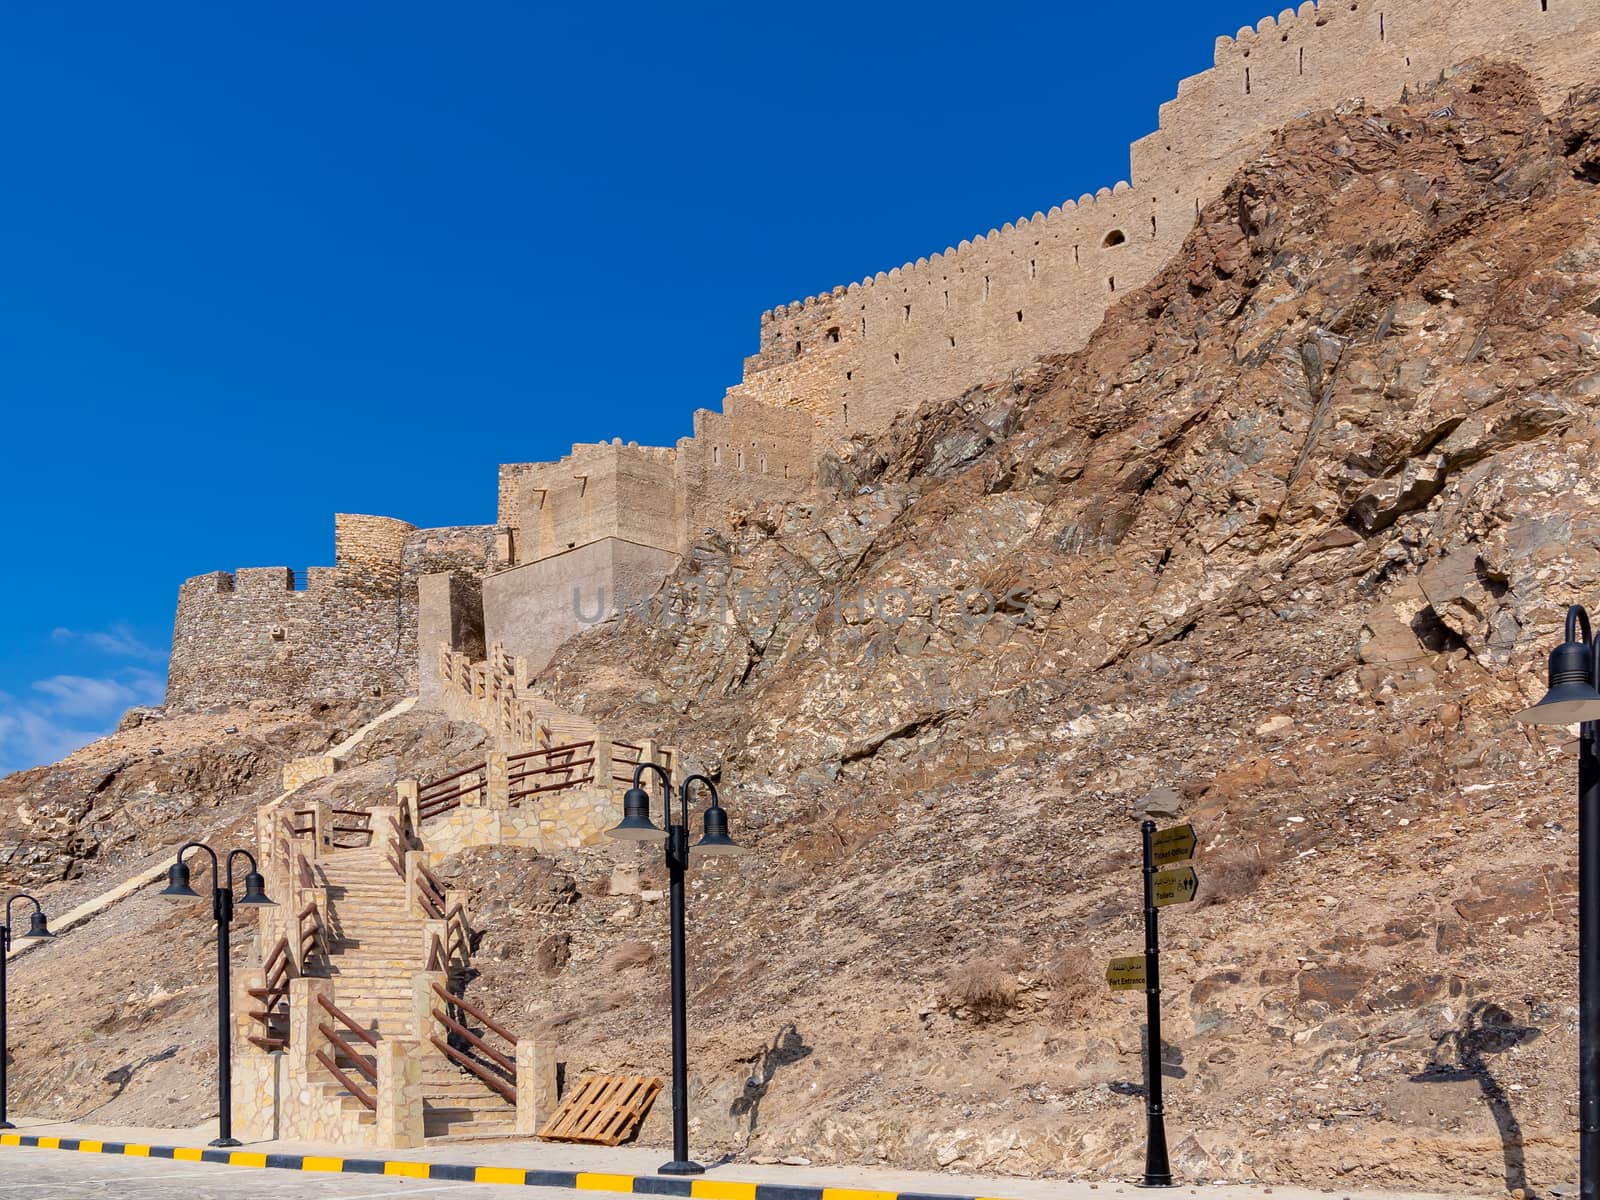 Fort Muttrah in Muscat, the capital of Oman by galsand